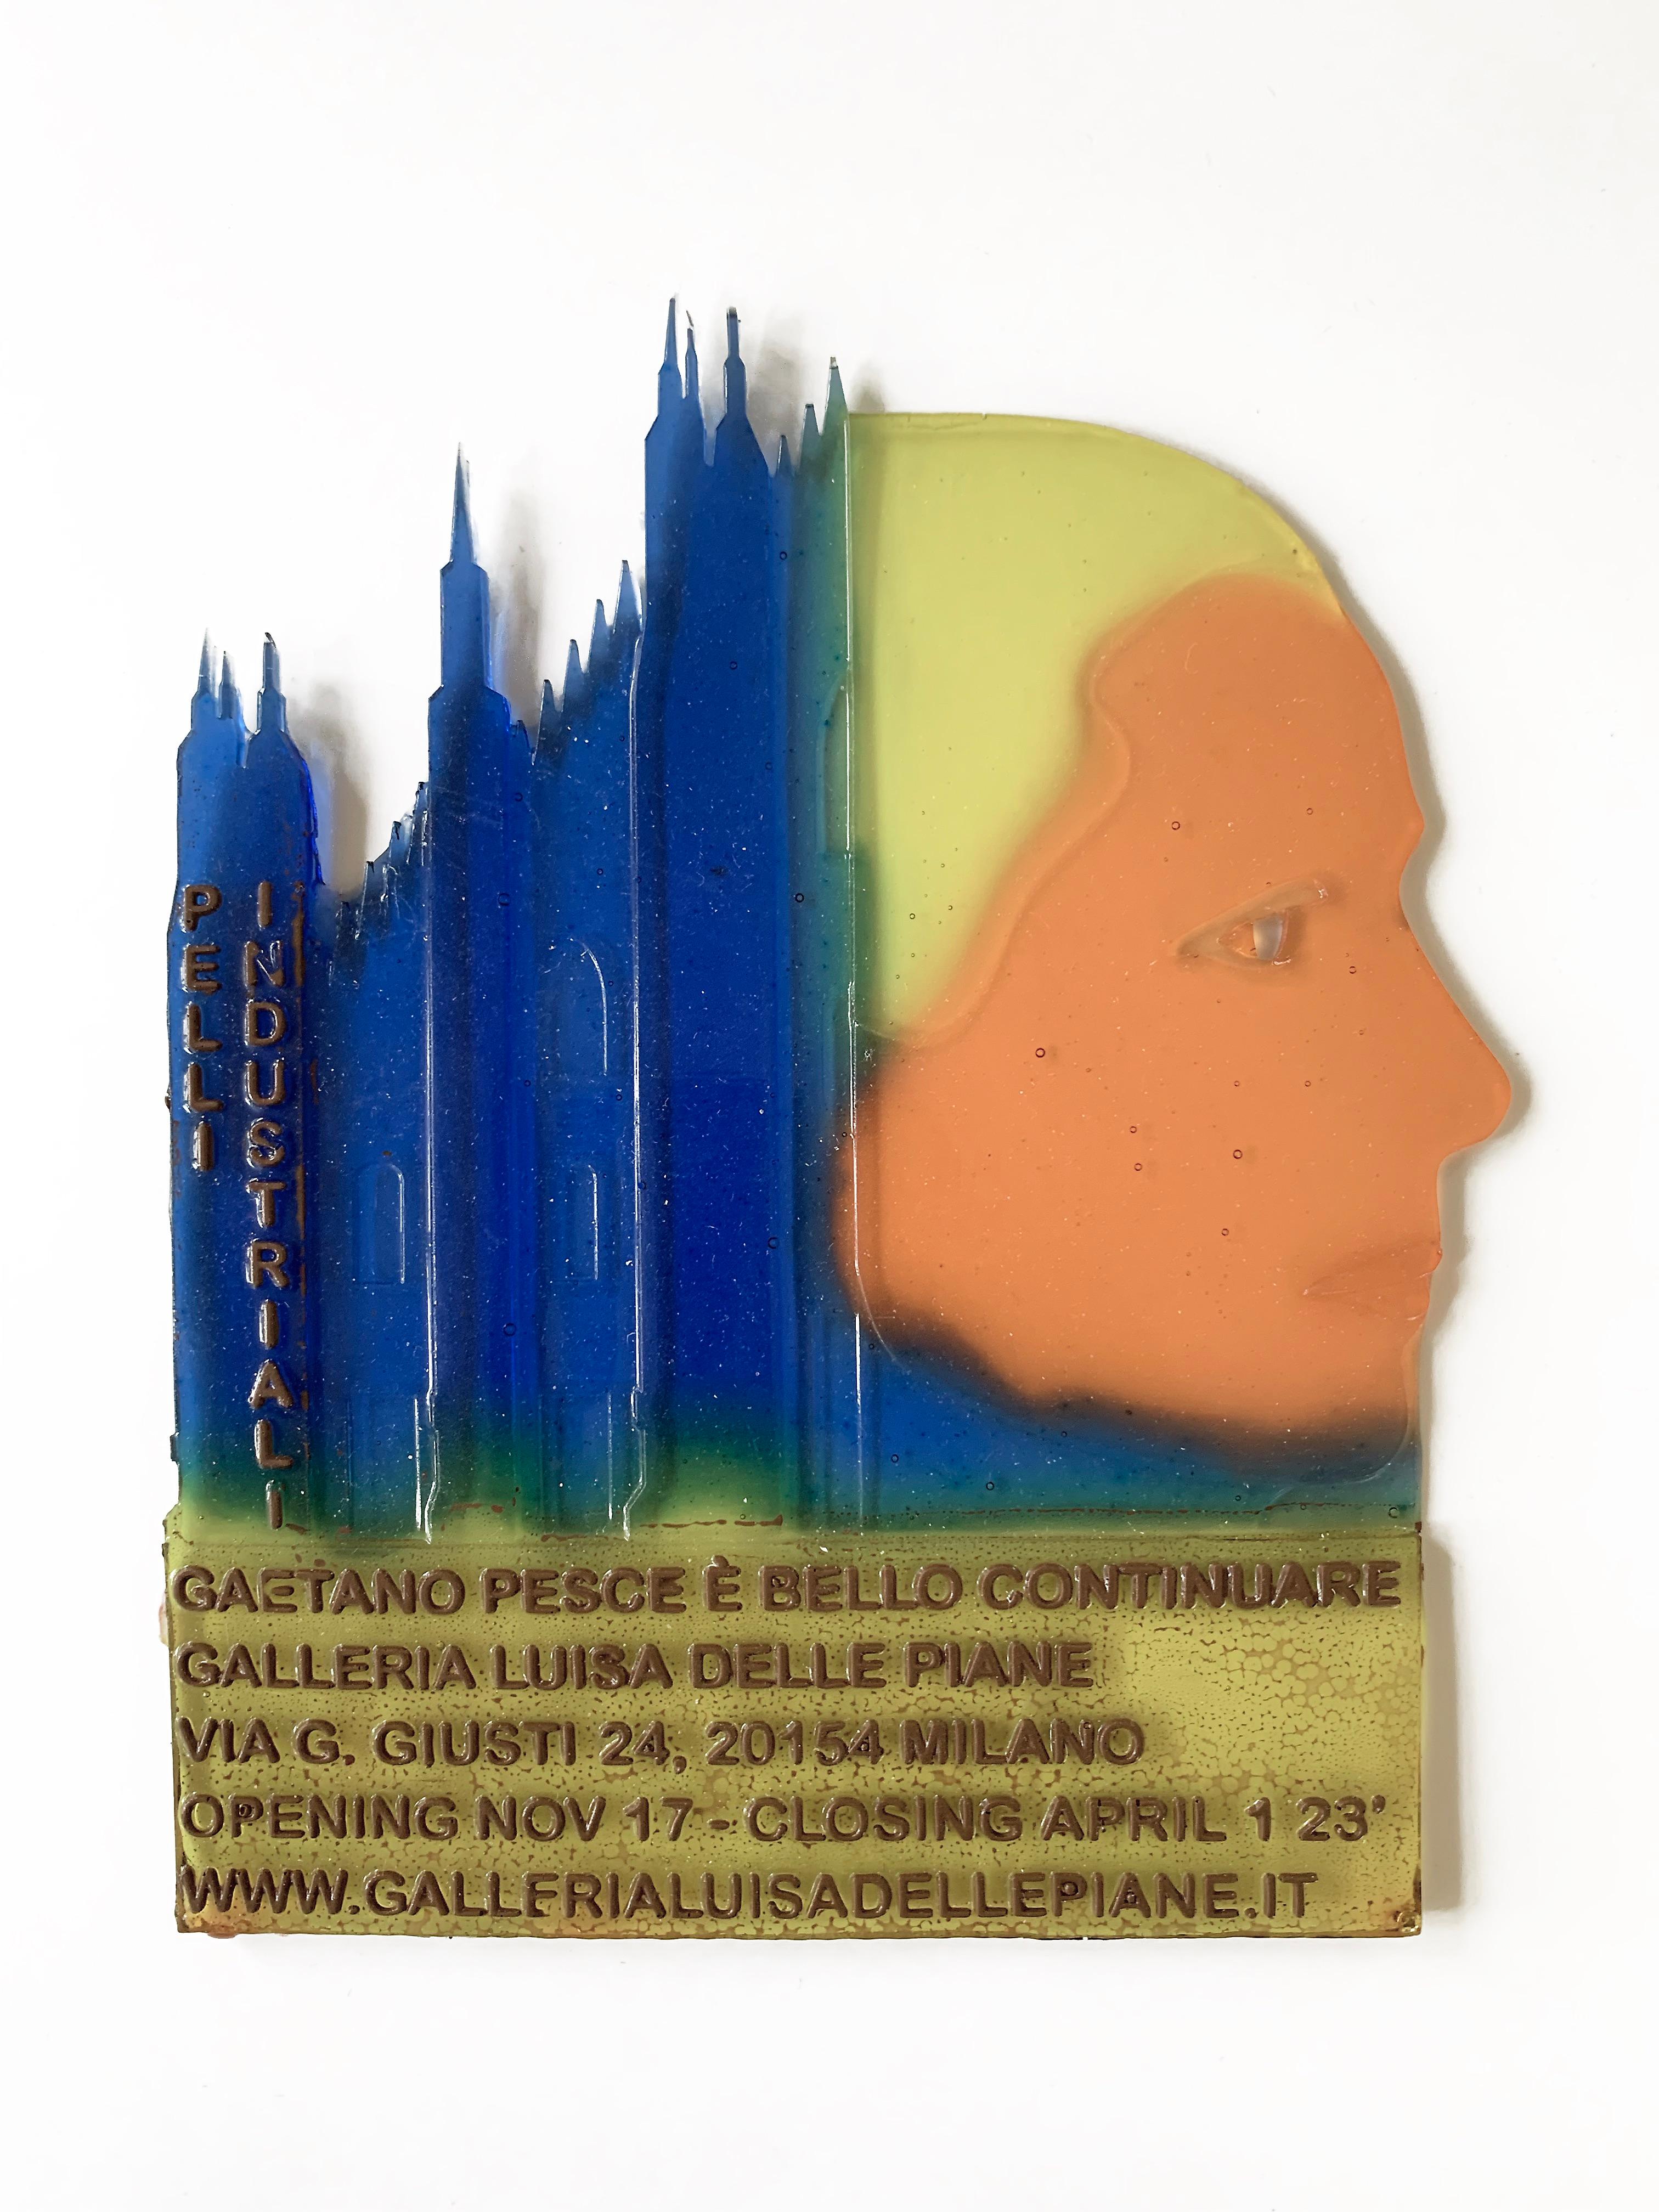 Here's a pair of very recent Gaetano Pesce resin invitations that have a highly stylized cityscape as their primary or shared feature. Each of these is more structured than Pesce's freeform invitations and suggests being hand-crafted in a different